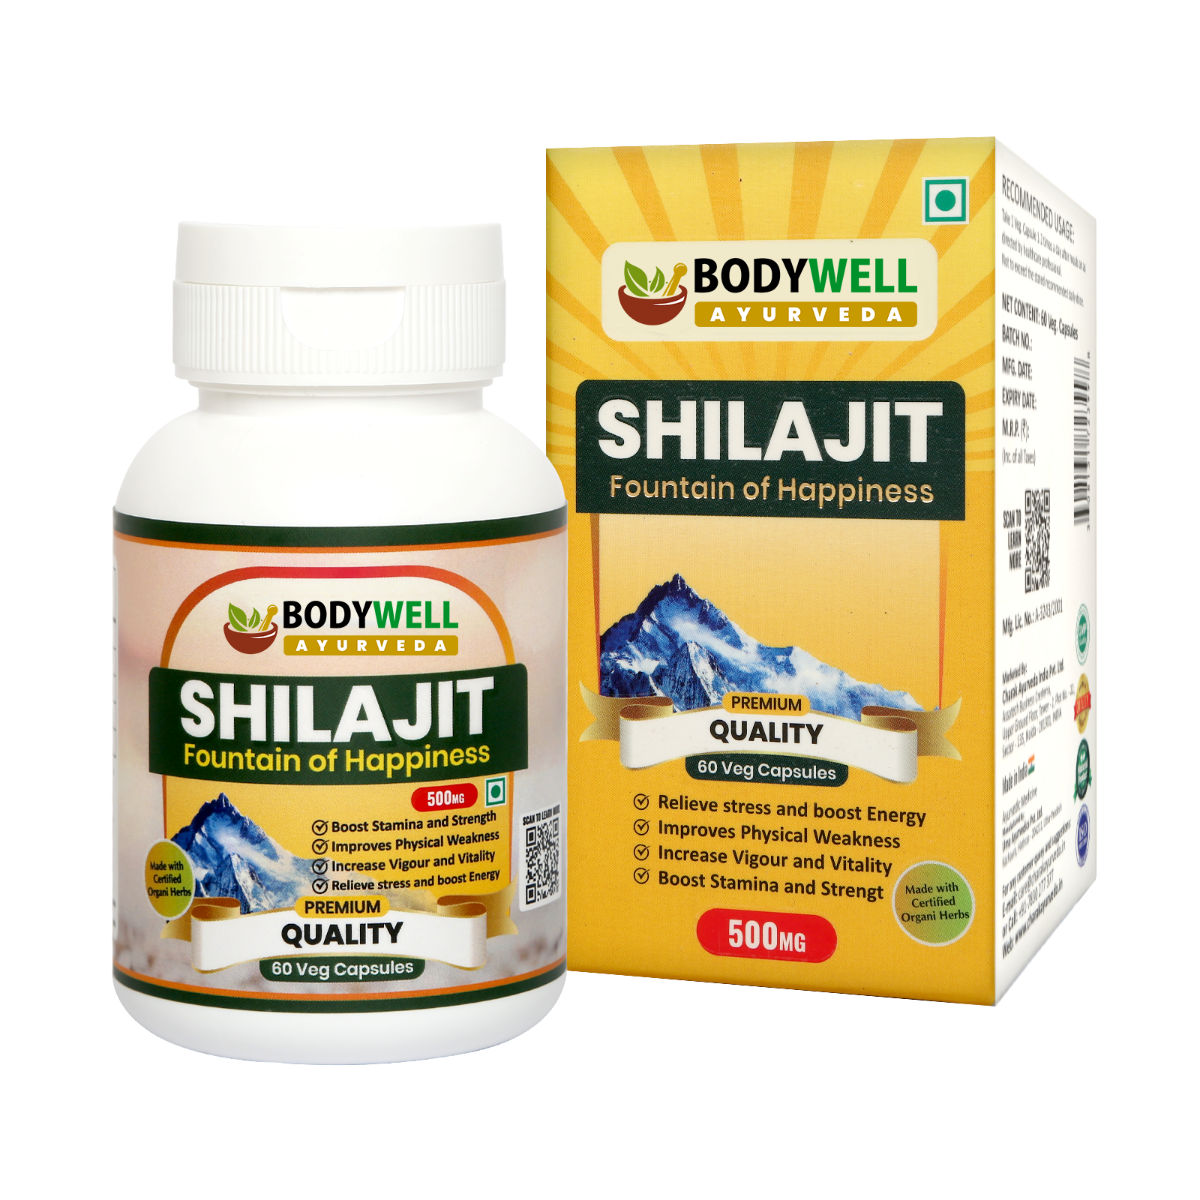 Bodywell Shilajit 500 mg, 60 Capsules Price, Uses, Side Effects,  Composition - Apollo Pharmacy